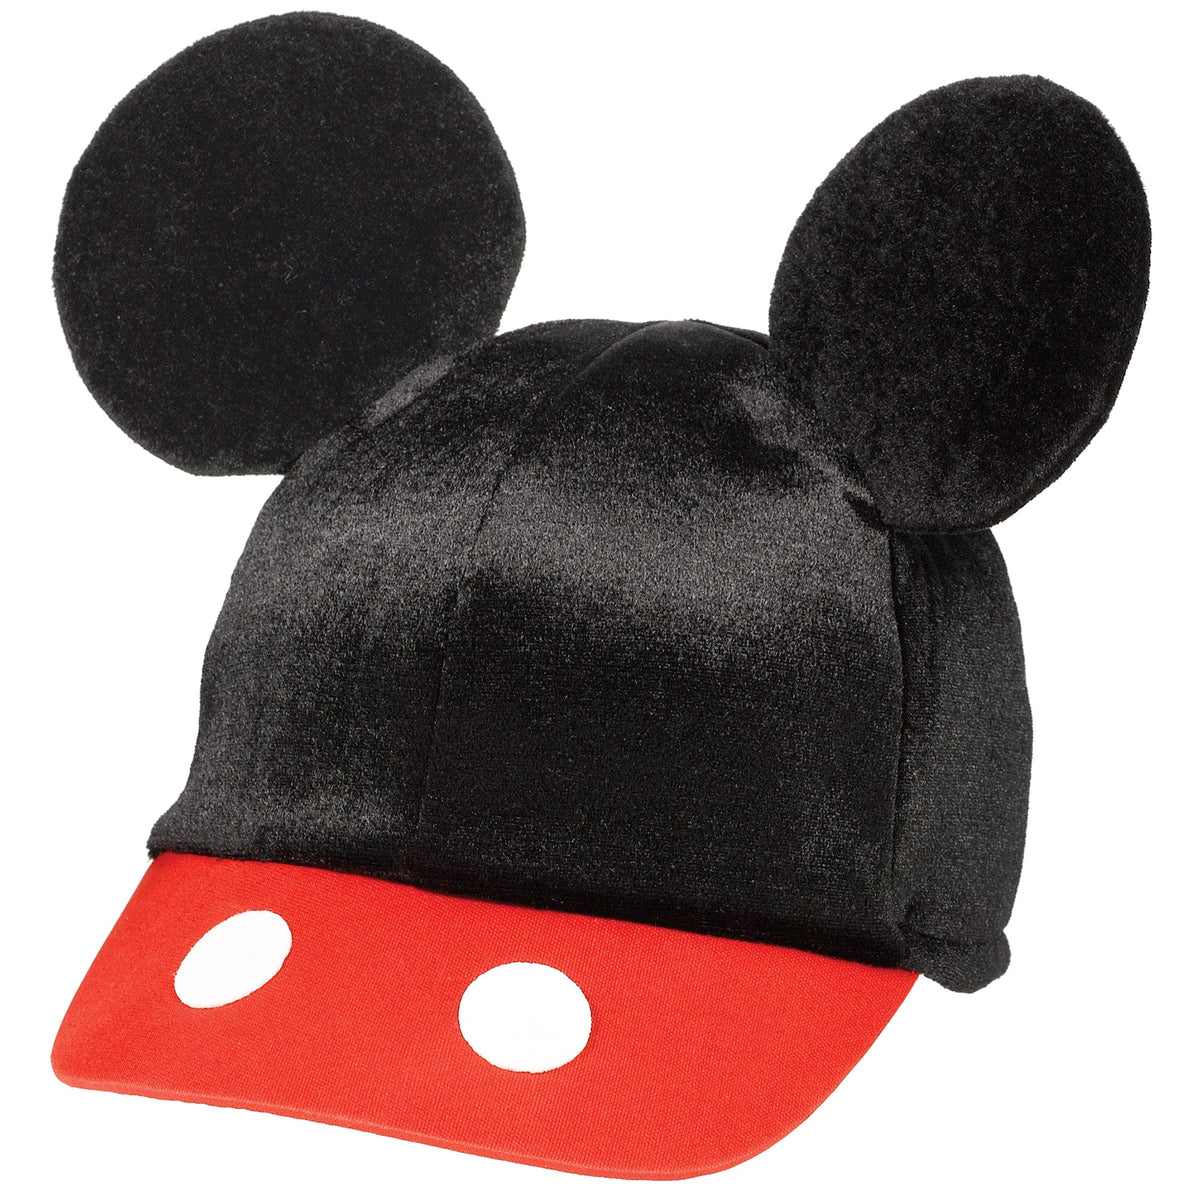 Mickey Mouse Forever Deluxe Hat 10"h x 6" w